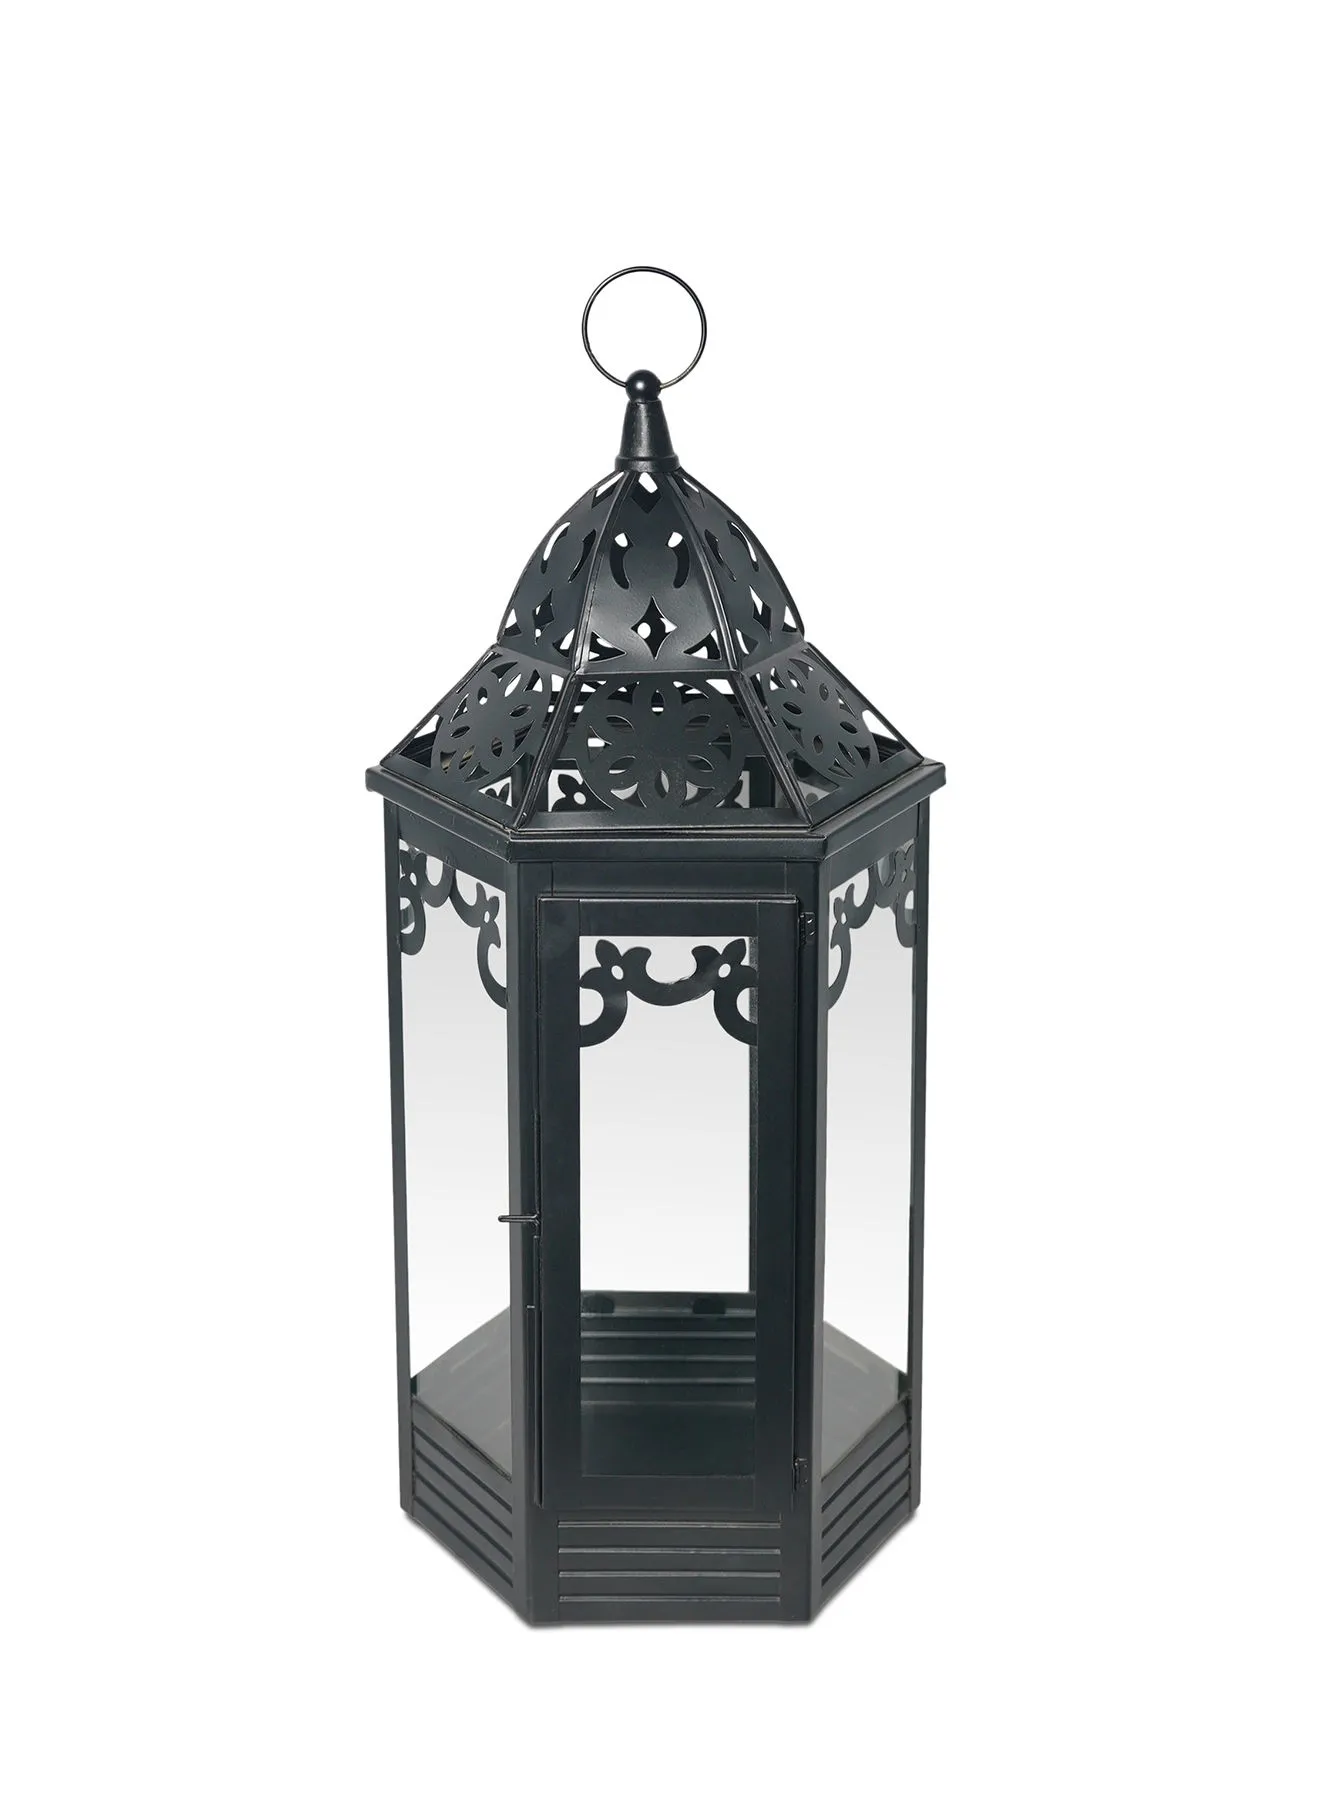 ebb & flow Modern Ideal Design Handmade Lantern Unique Luxury Quality Scents For The Perfect Stylish Home Black 18X18X54centimeter